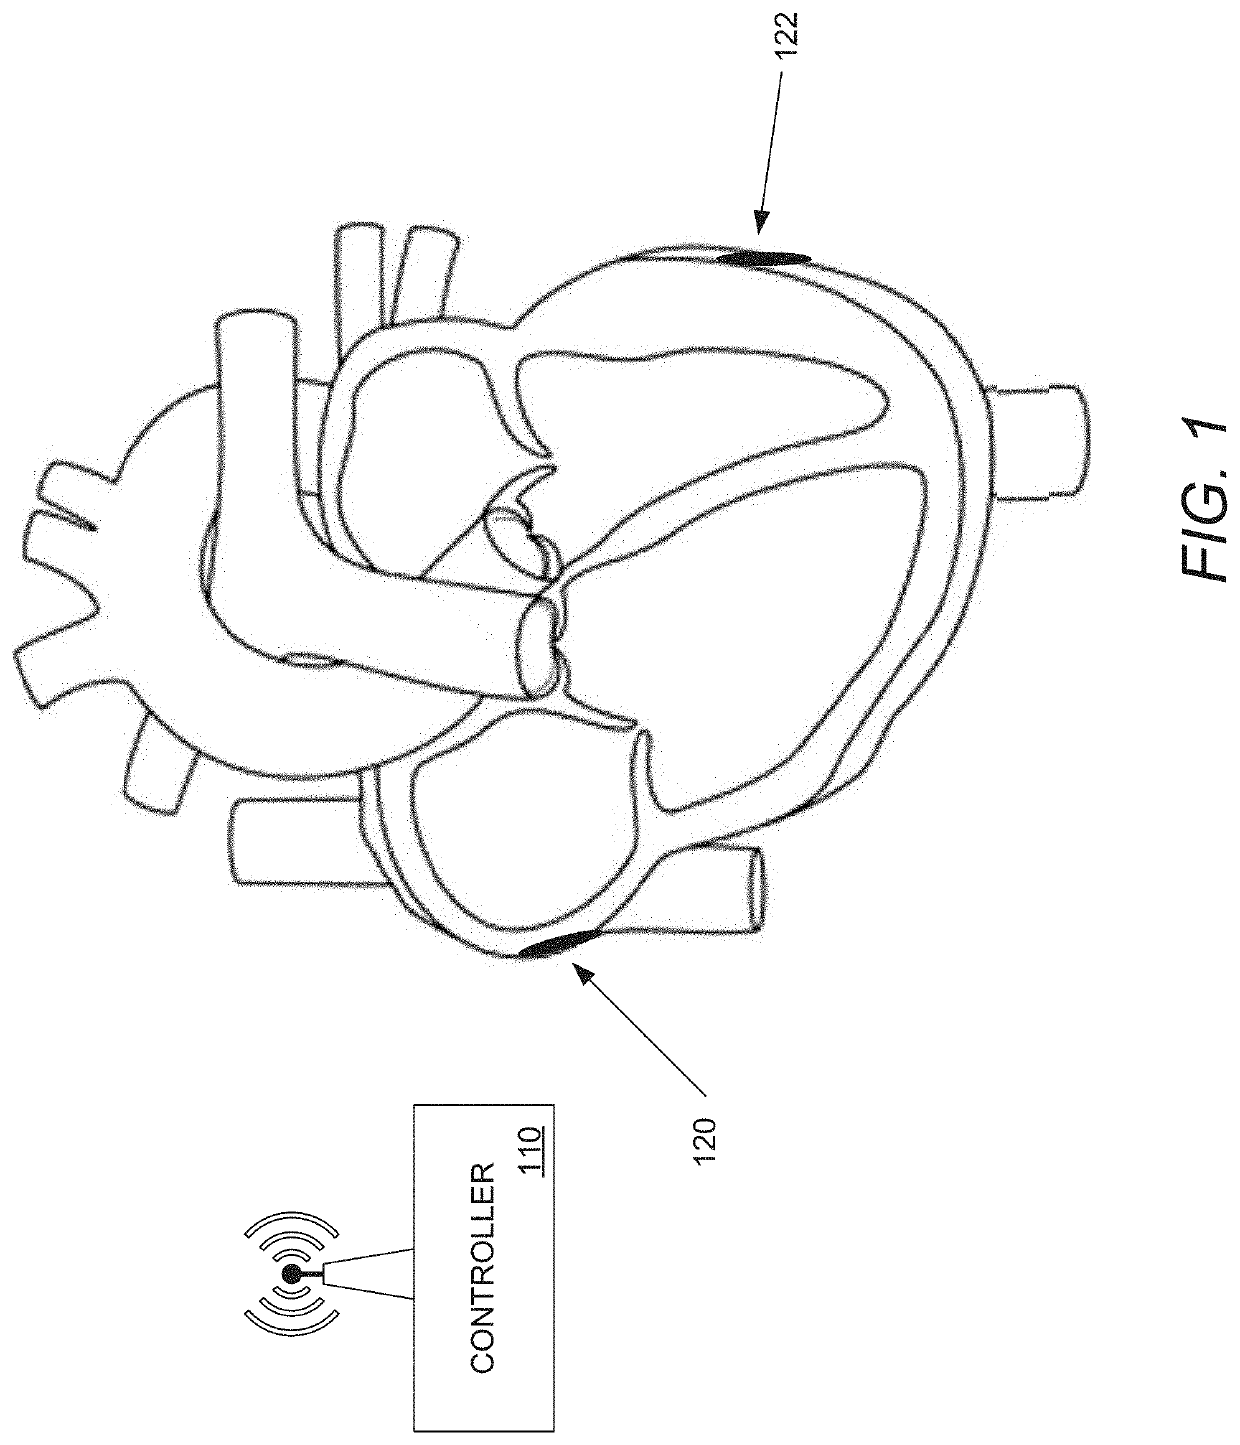 Systems and Methods for Controlling Wirelessly Powered Leadless Pacemakers